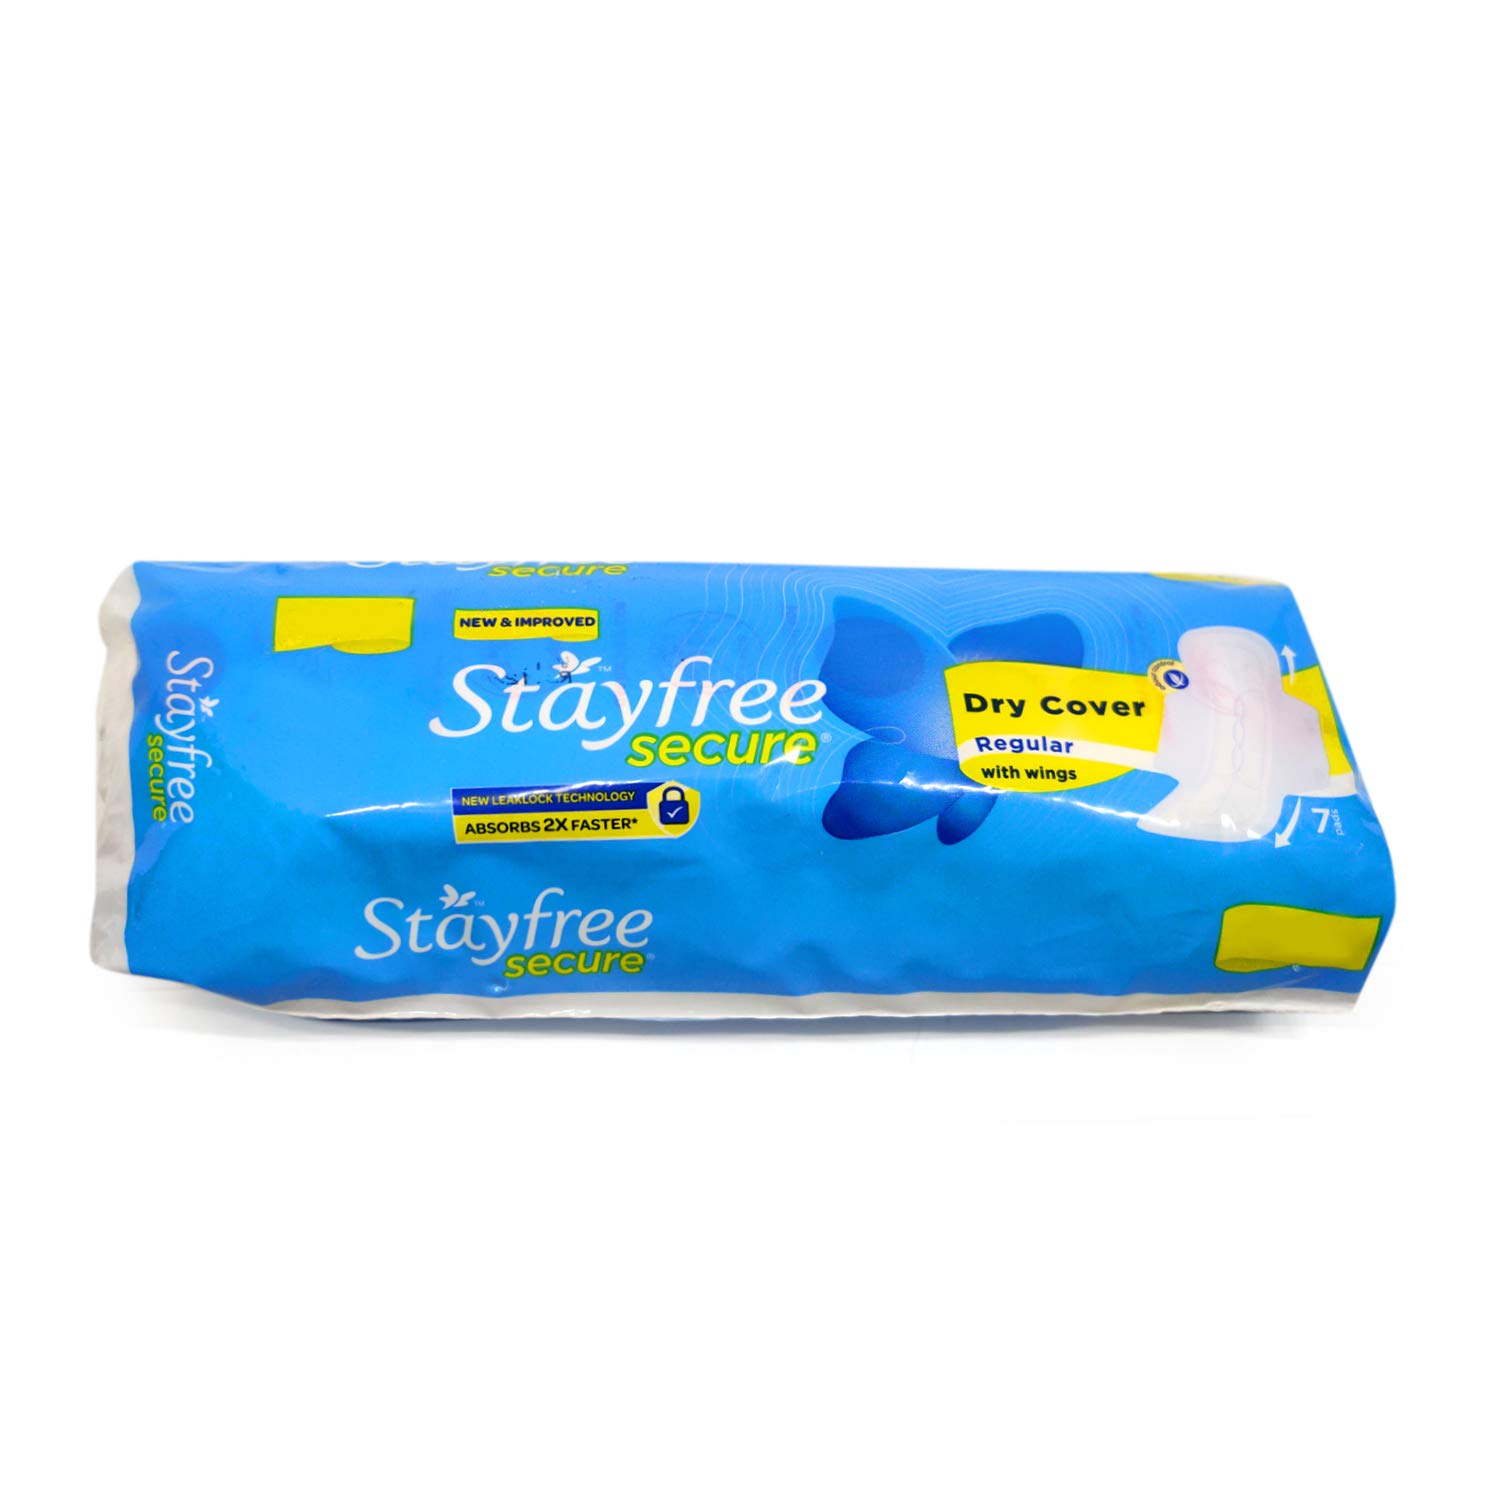 Stayfree Secure Dry Cover Extra Large